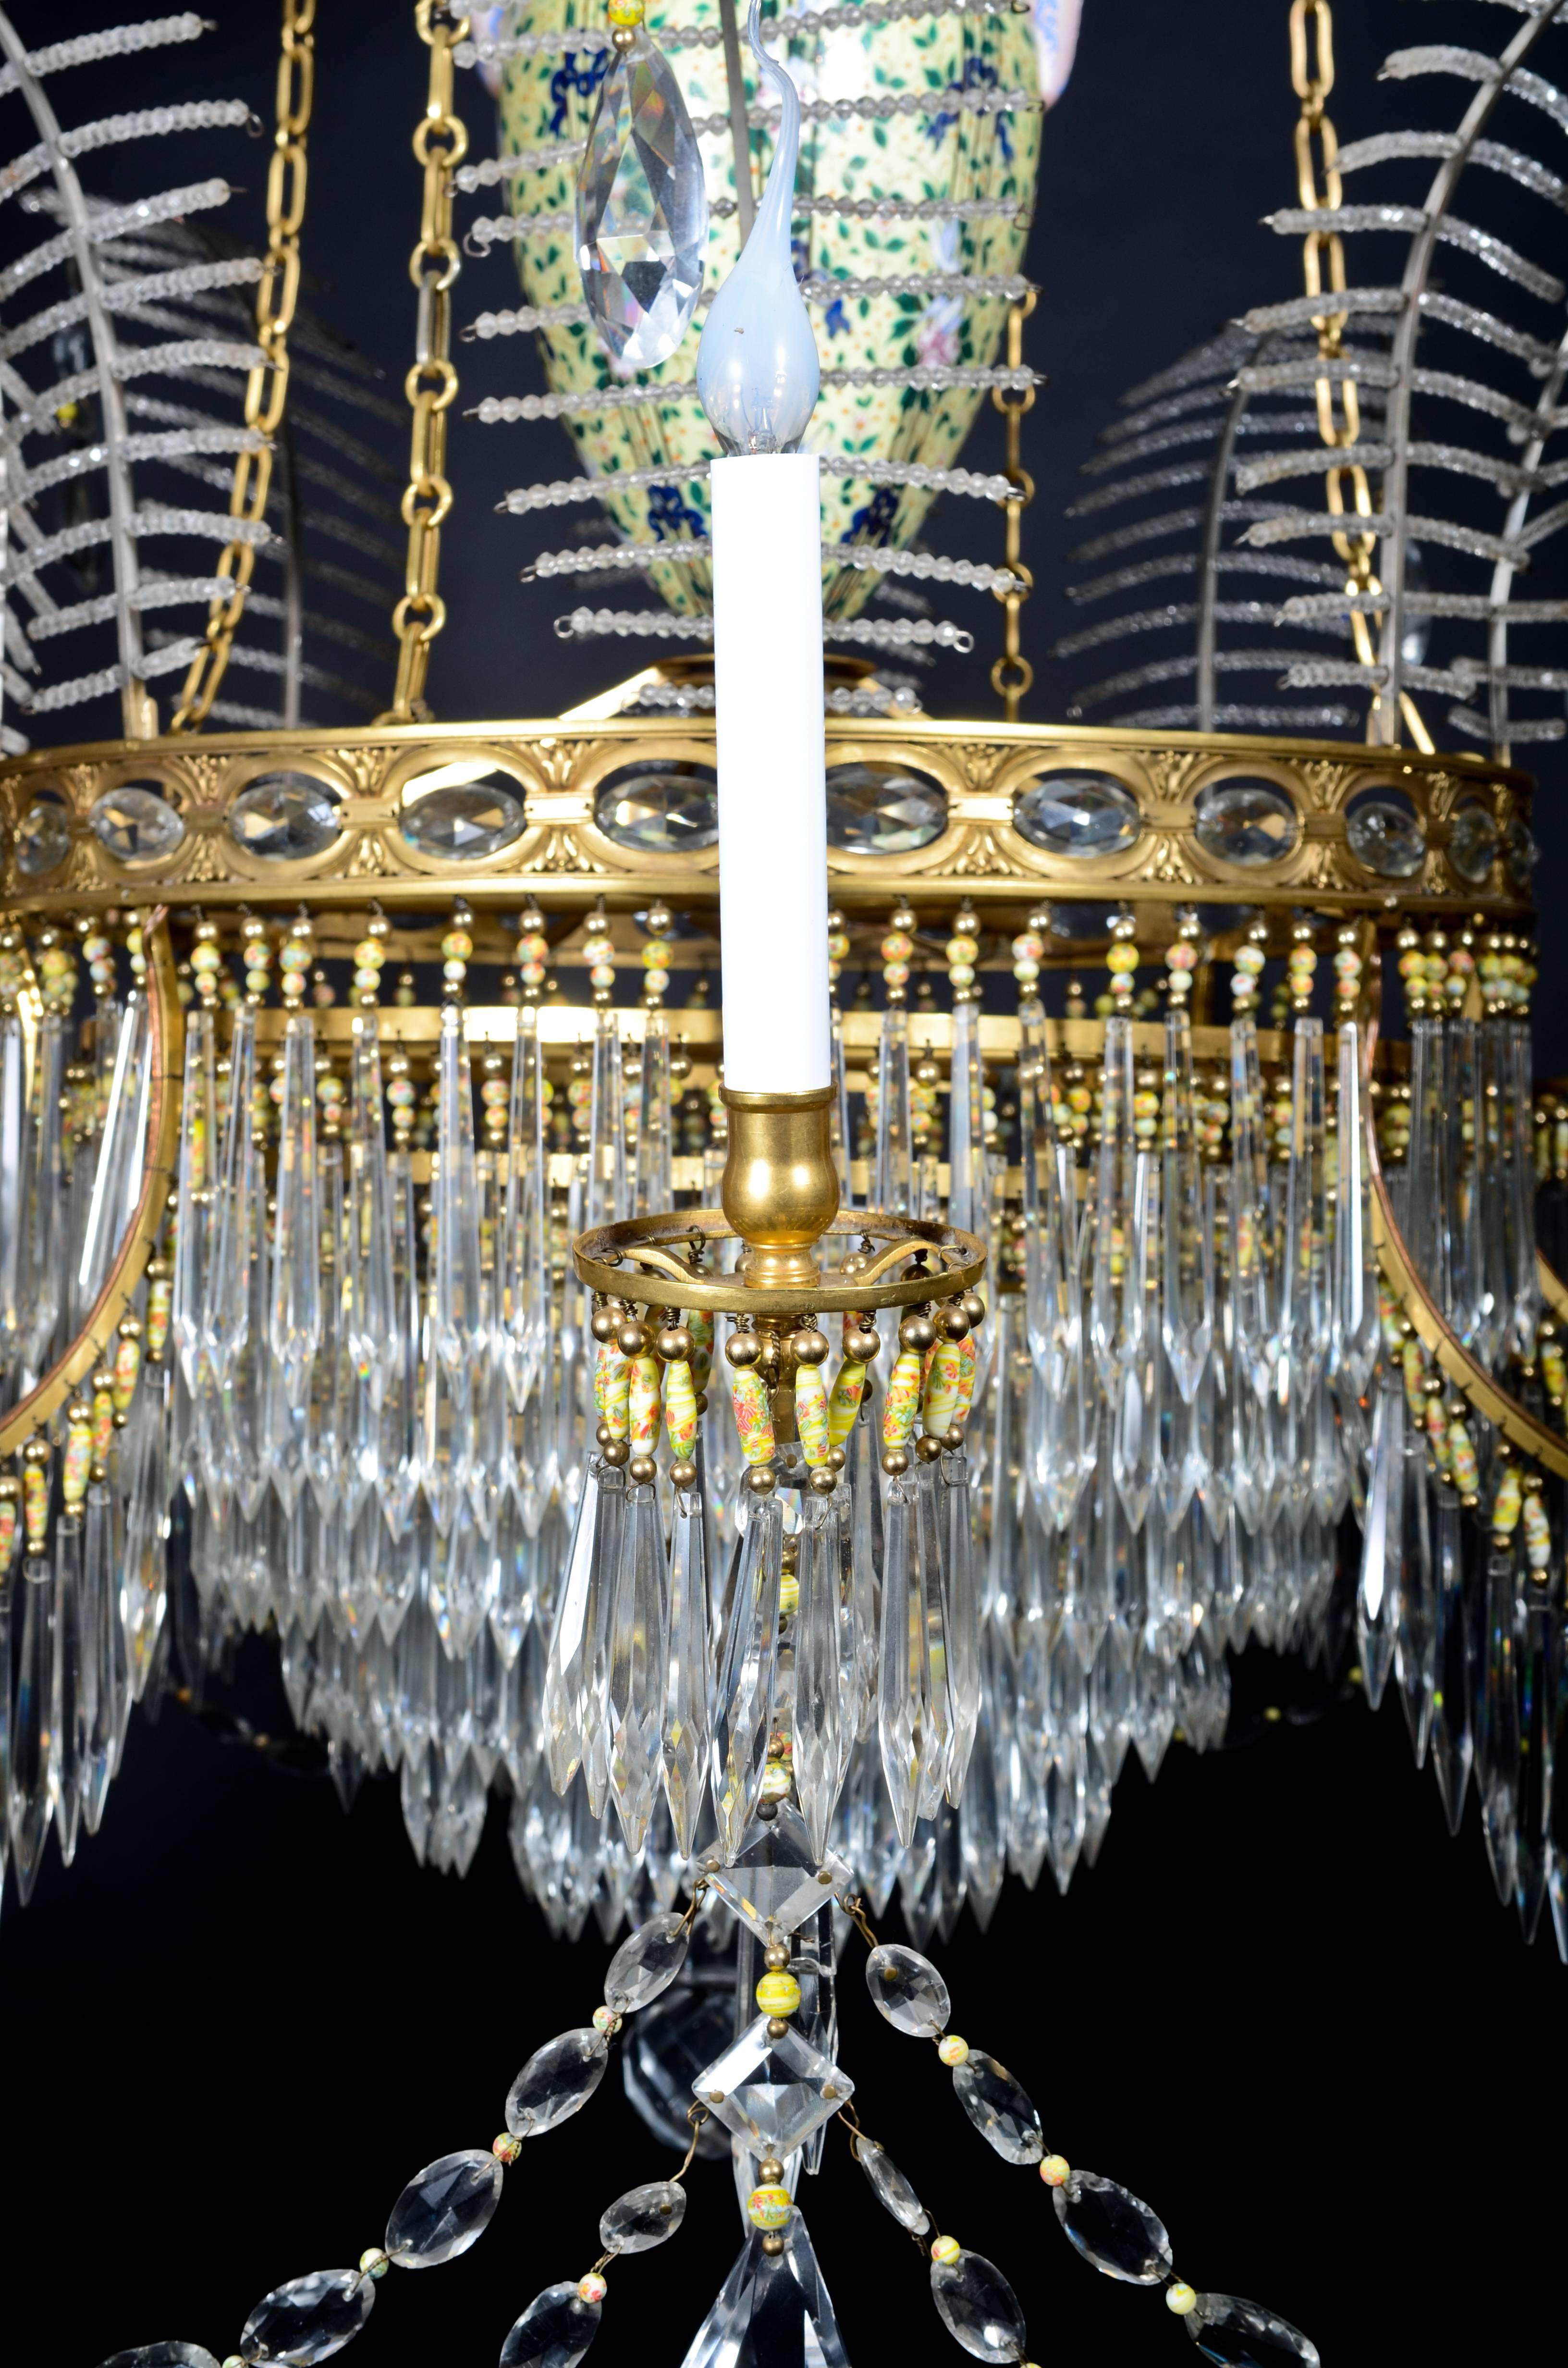 European Palatial & Large Antique Russian Neoclassical Gilt Bronze and Crystal Chandelier For Sale